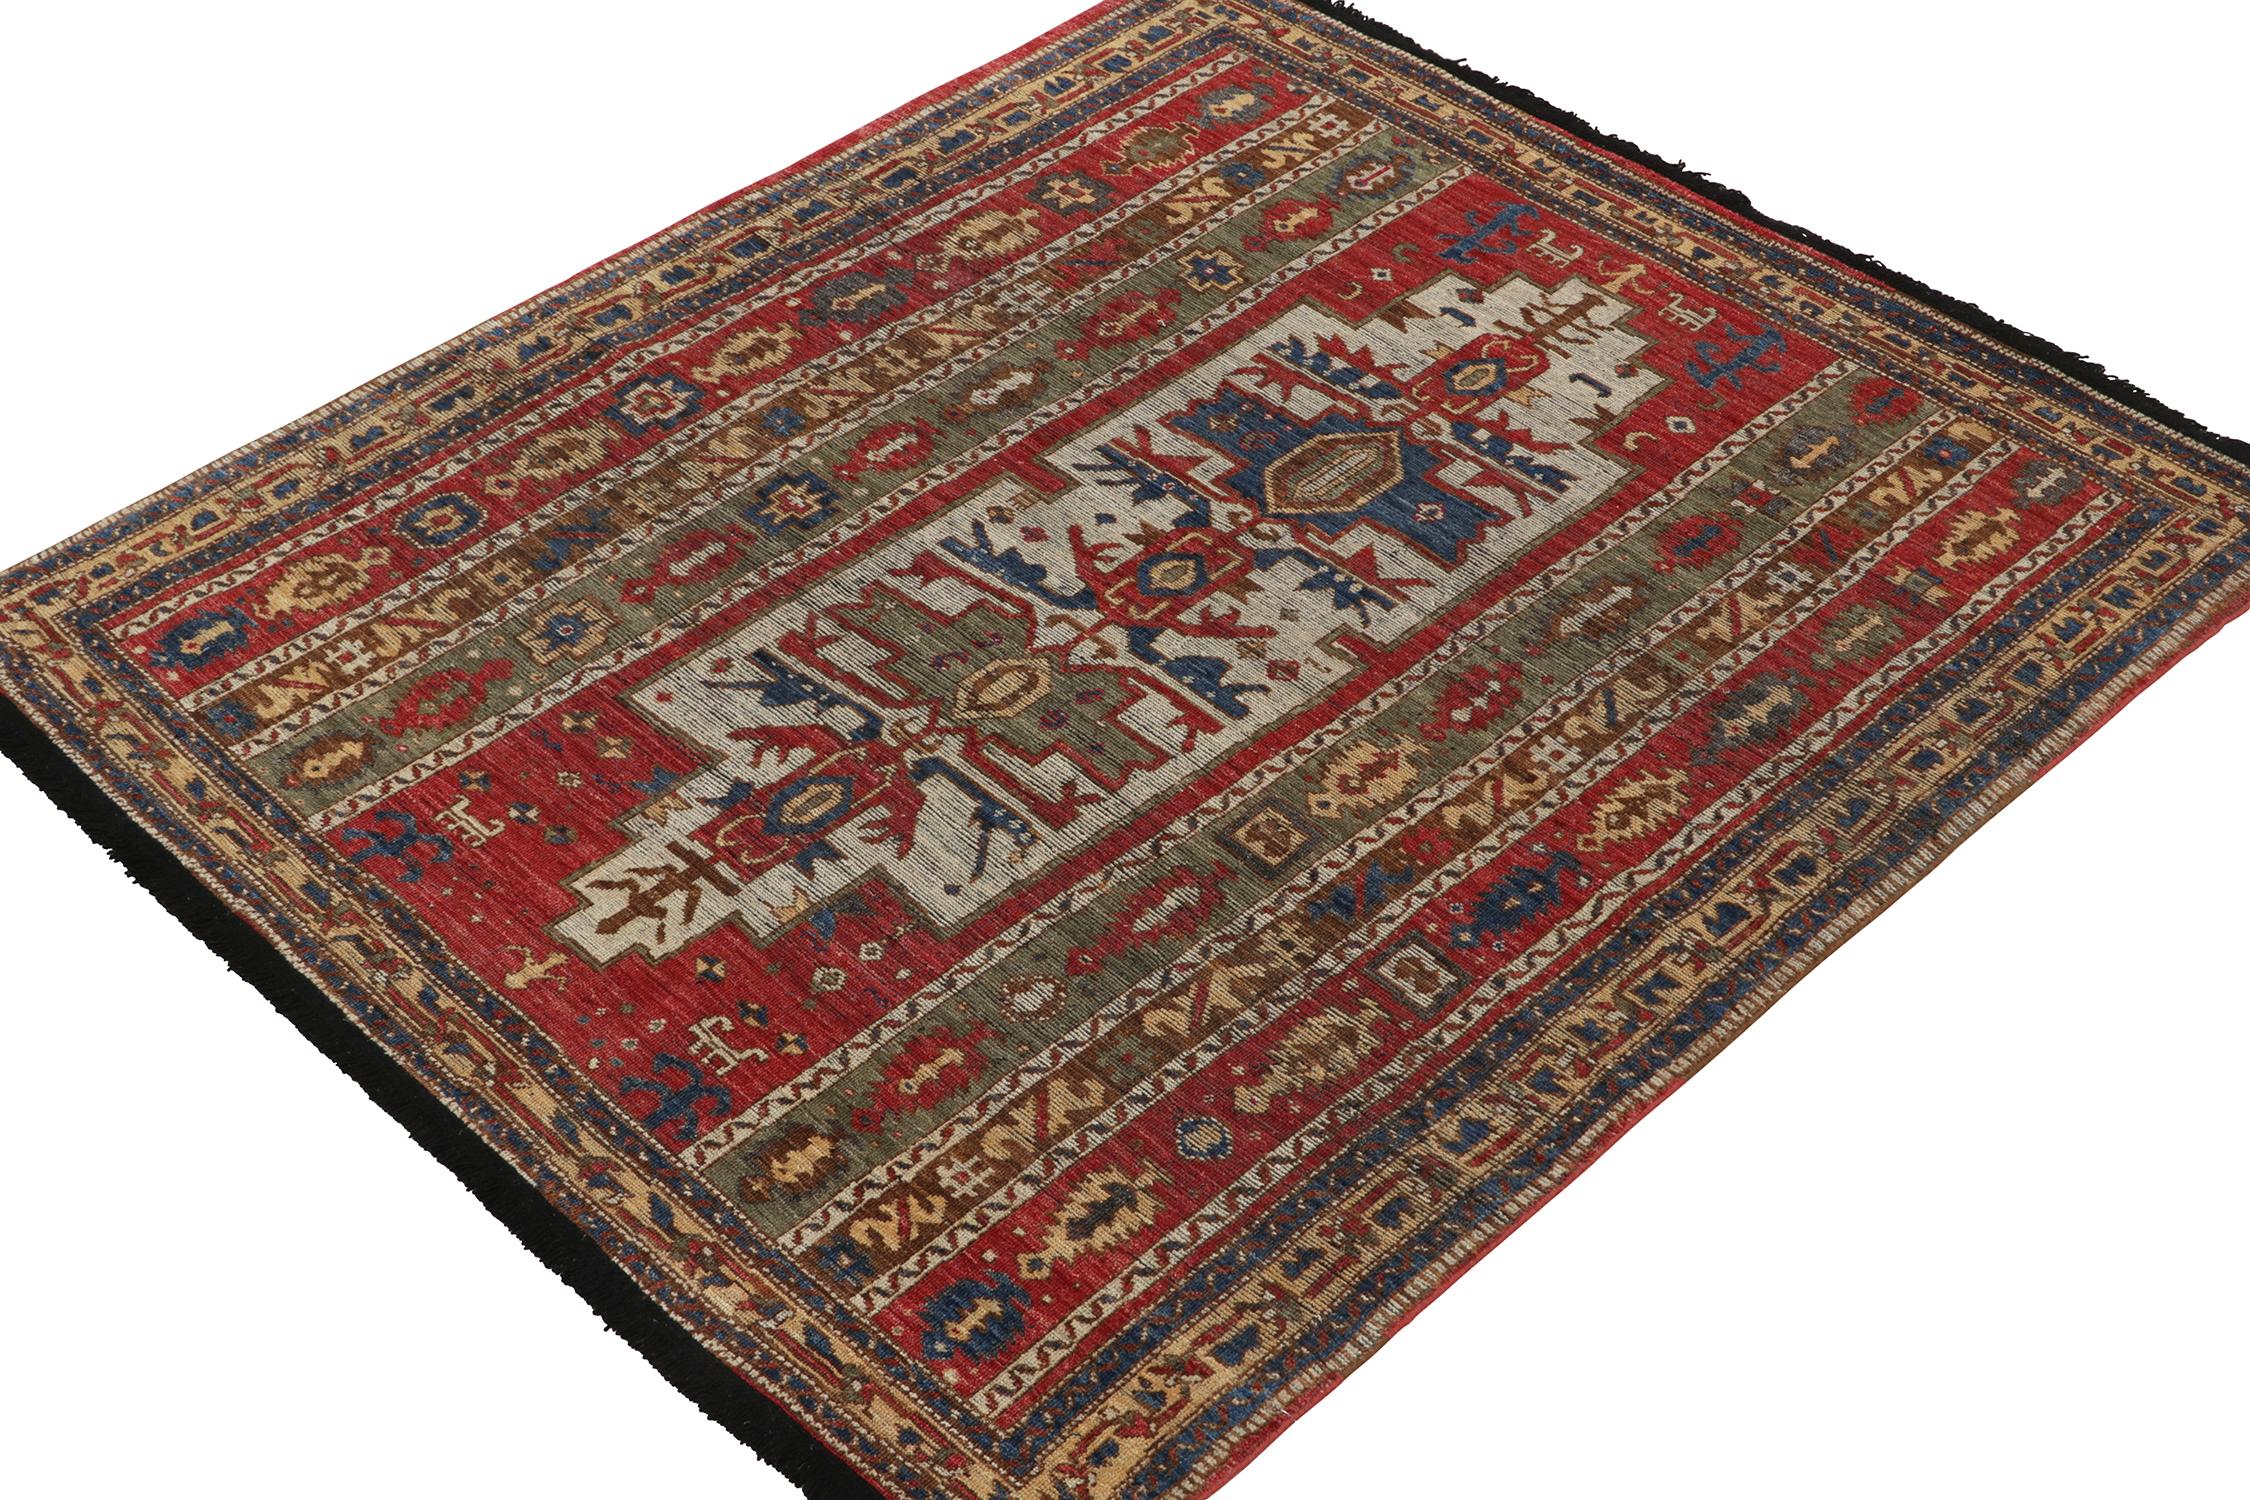 This 6x7 rug is a regal new entry to Rug & Kilim’s custom classics Burano collection. Hand-knotted in Persian wool.
Further on the Design: 
This piece draws on tribal rugs and medallion, motif, and stripe patterns in rich red, green, blue, and